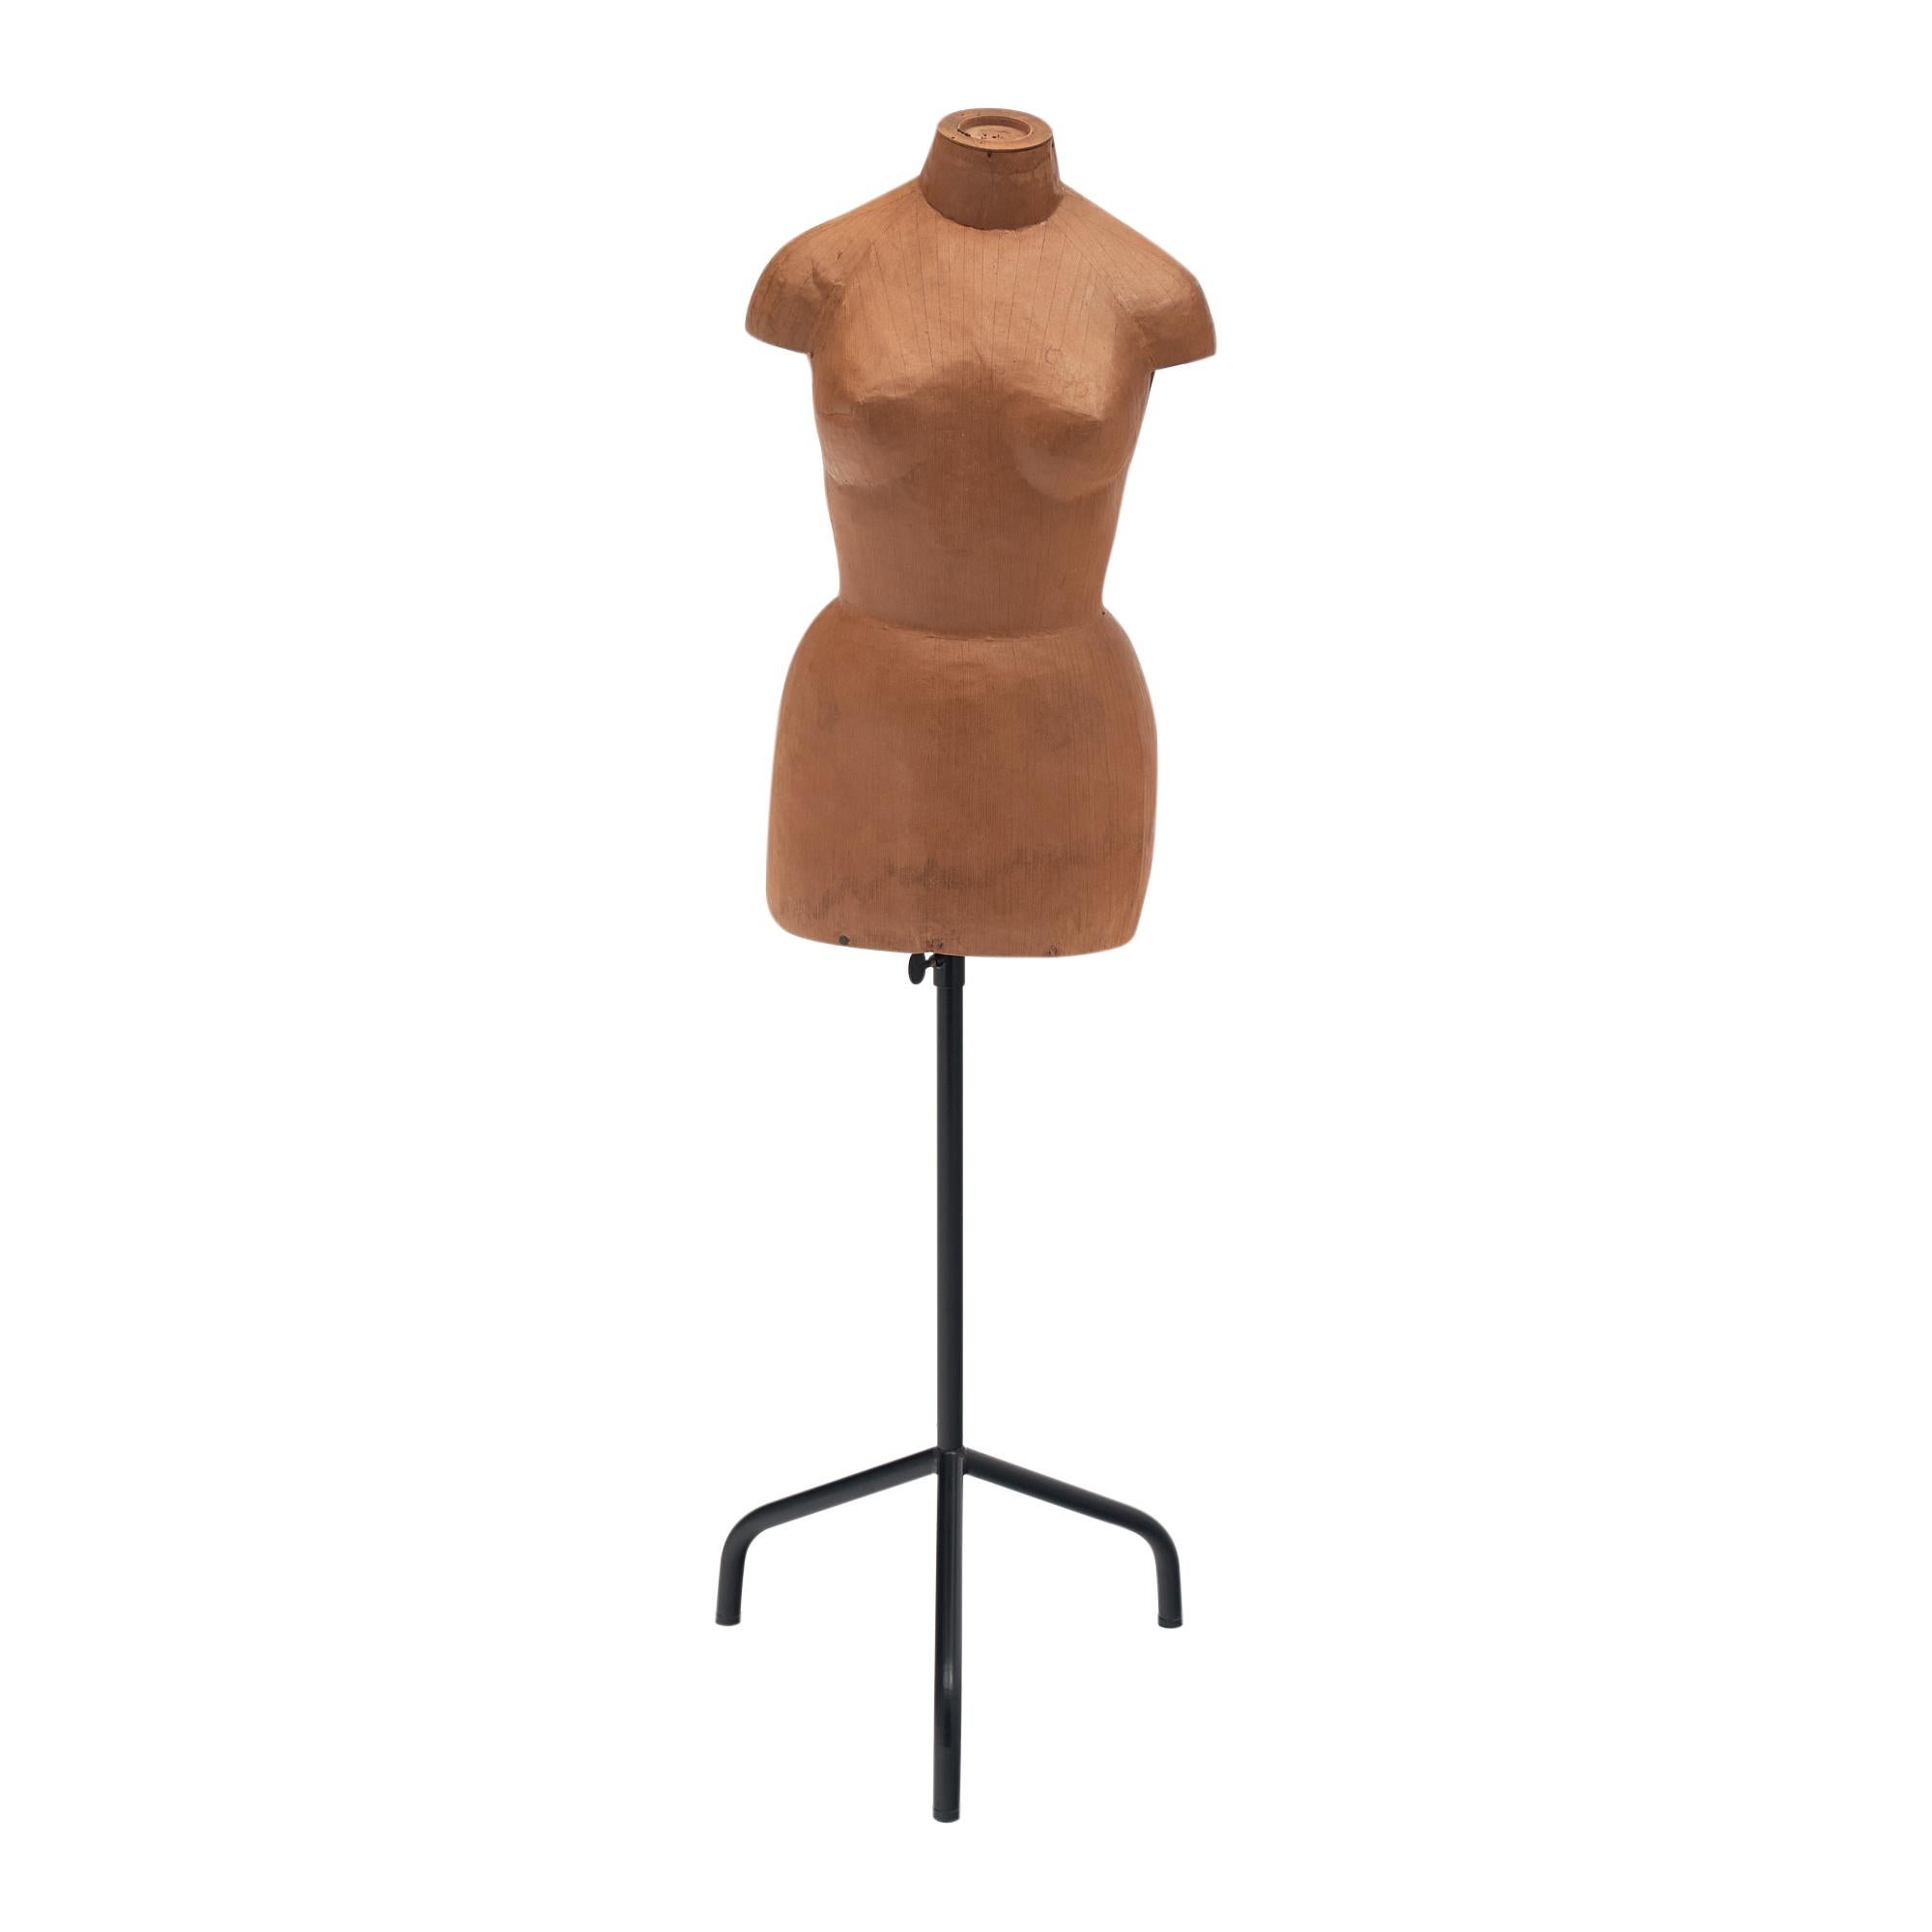 Mannequin from Paris, France made of papier-mâché on a metal tripod stand. The mannequin rests on an adjustable stand that can be lowered down to a height of 43.12”.